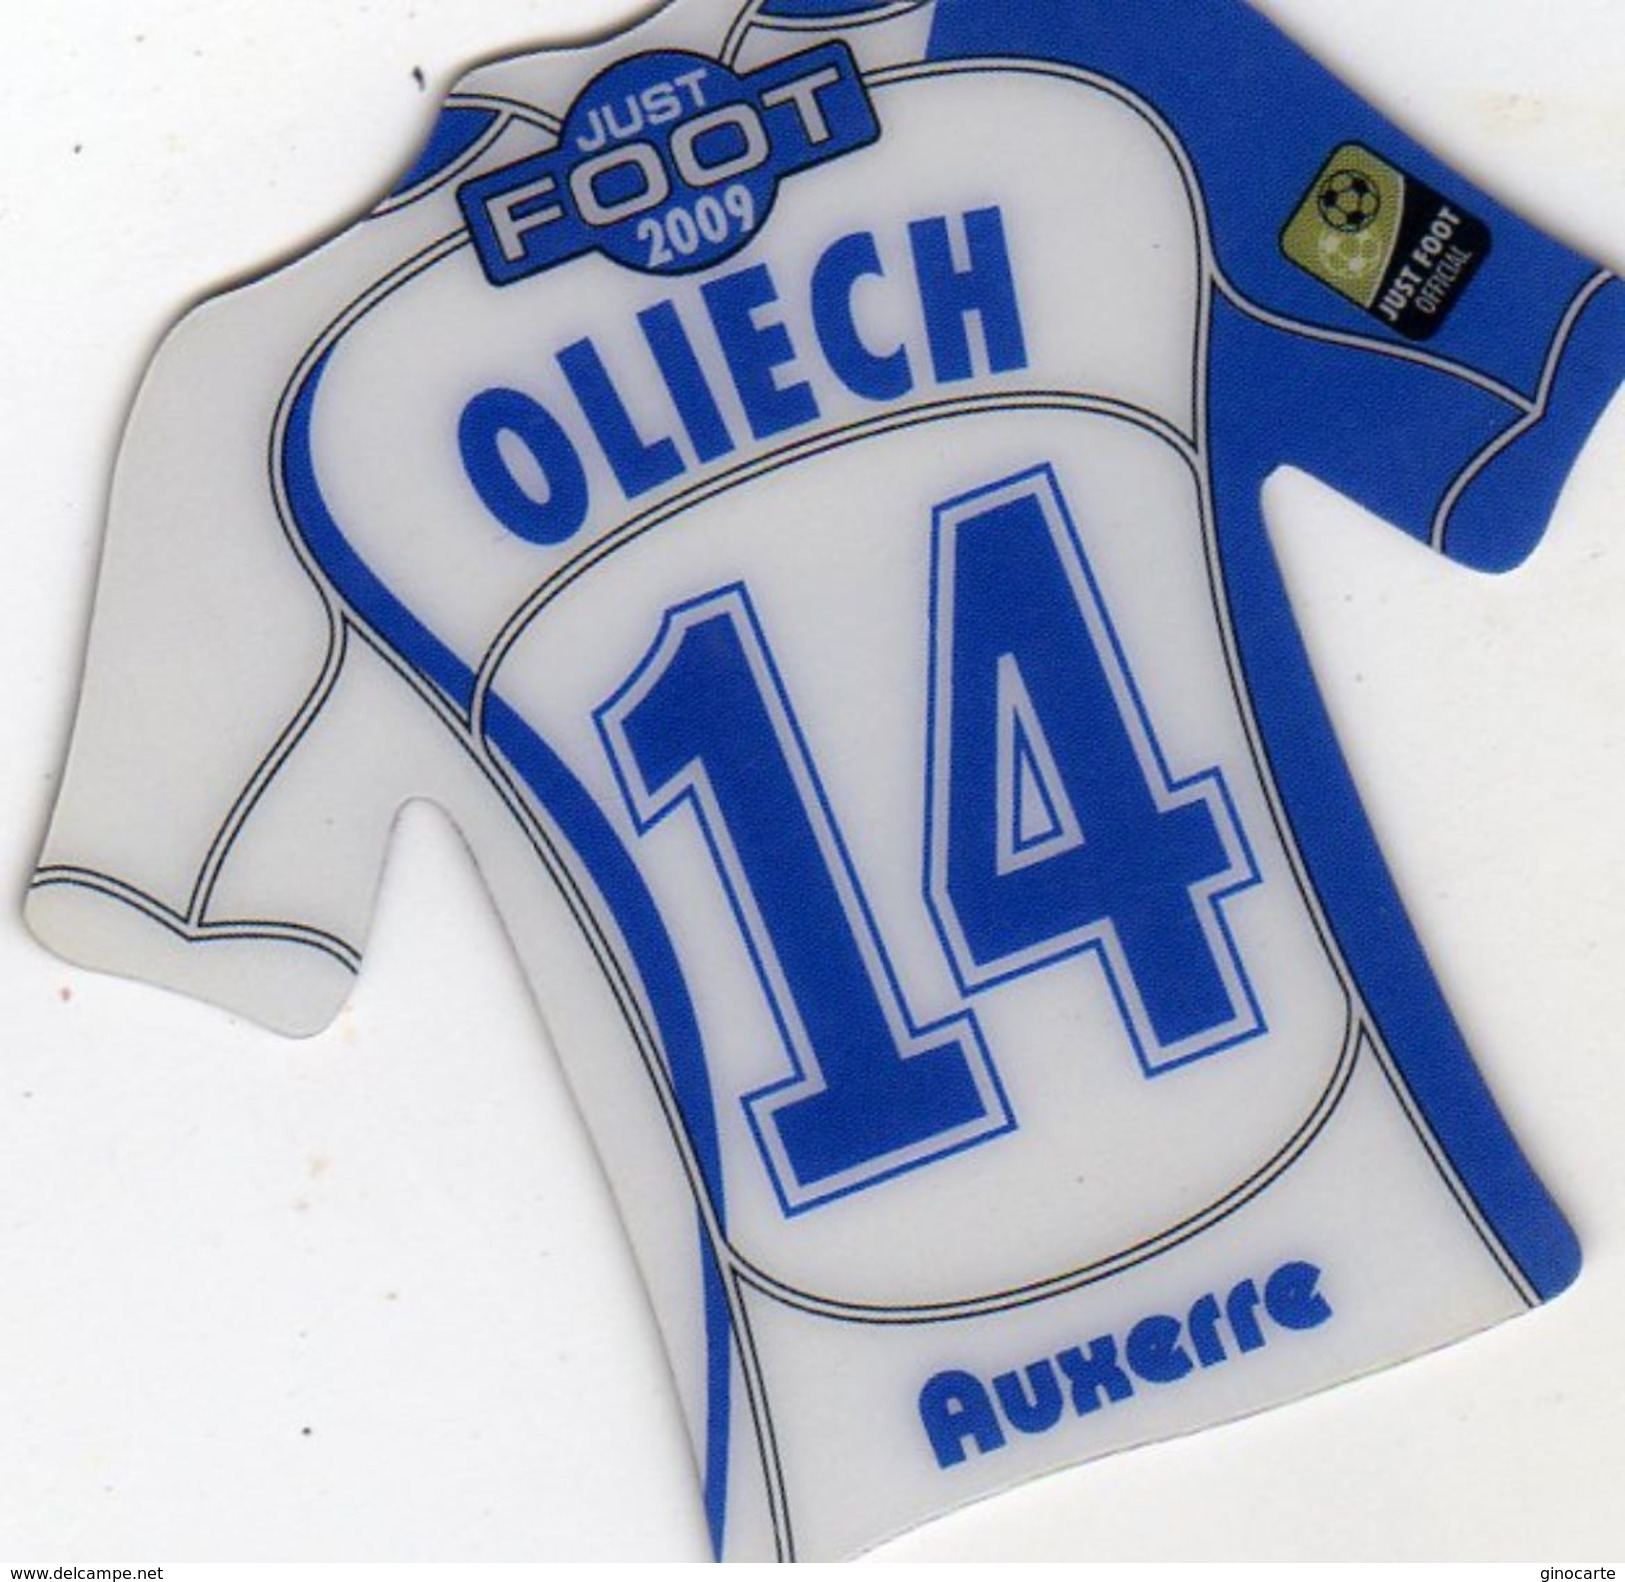 Magnet Magnets Maillot De Football Pitch Auxerre Oliech 2009 - Sports